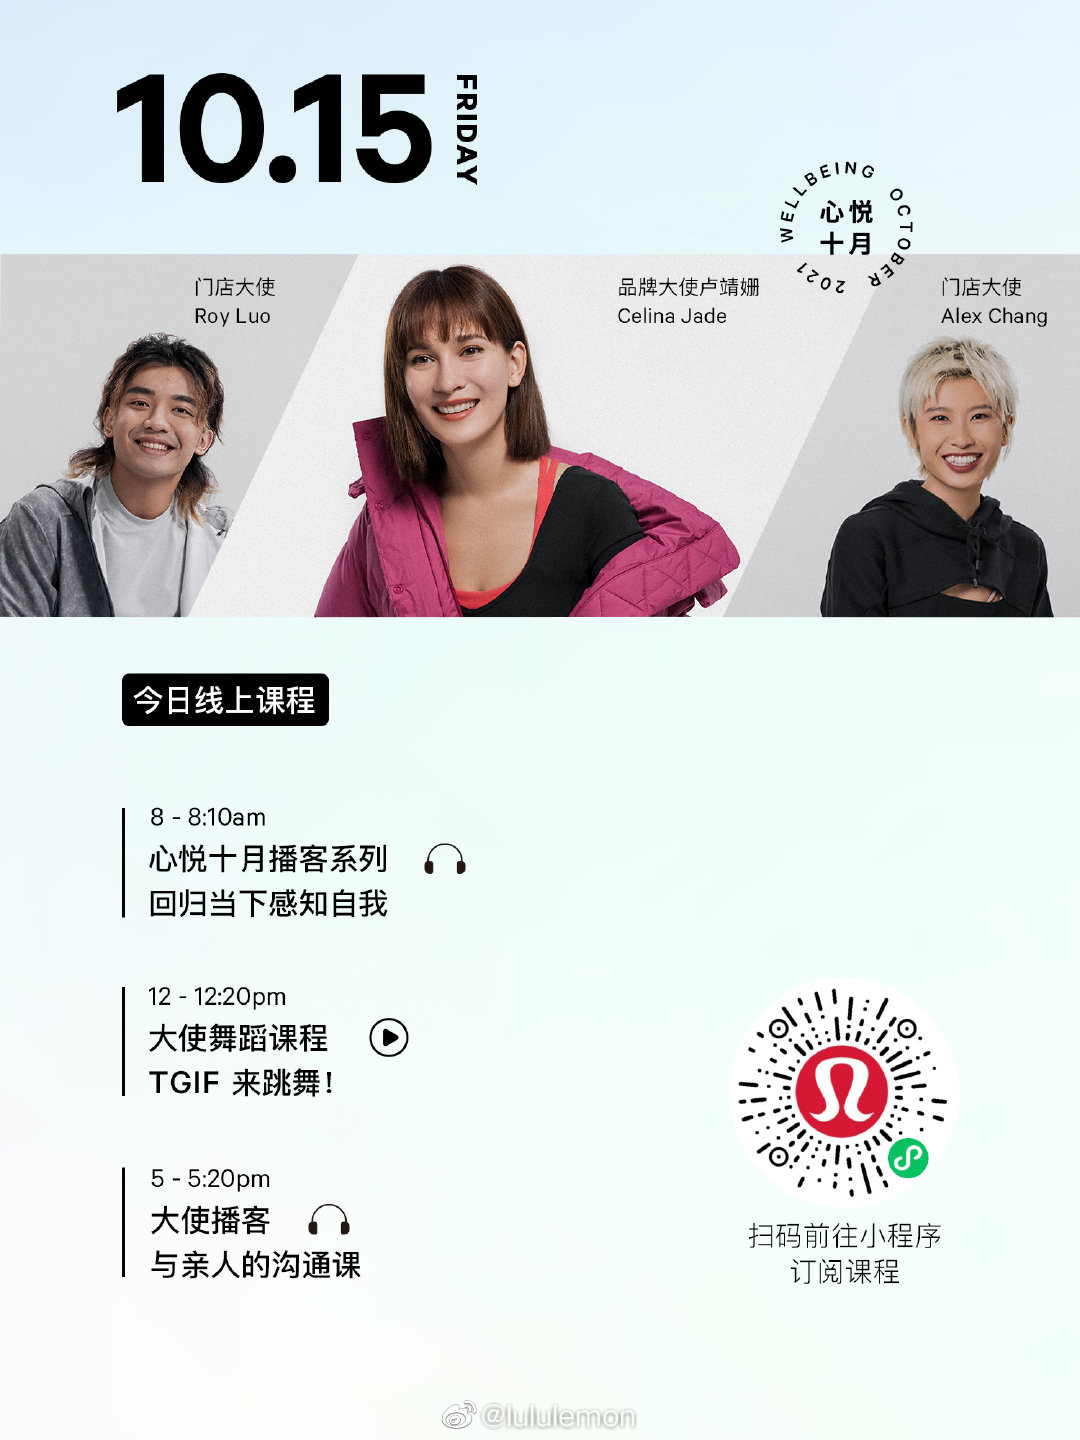 Consumer can sign up for online activities through Lululemon's WeChat Mini Program by scanning the QR code